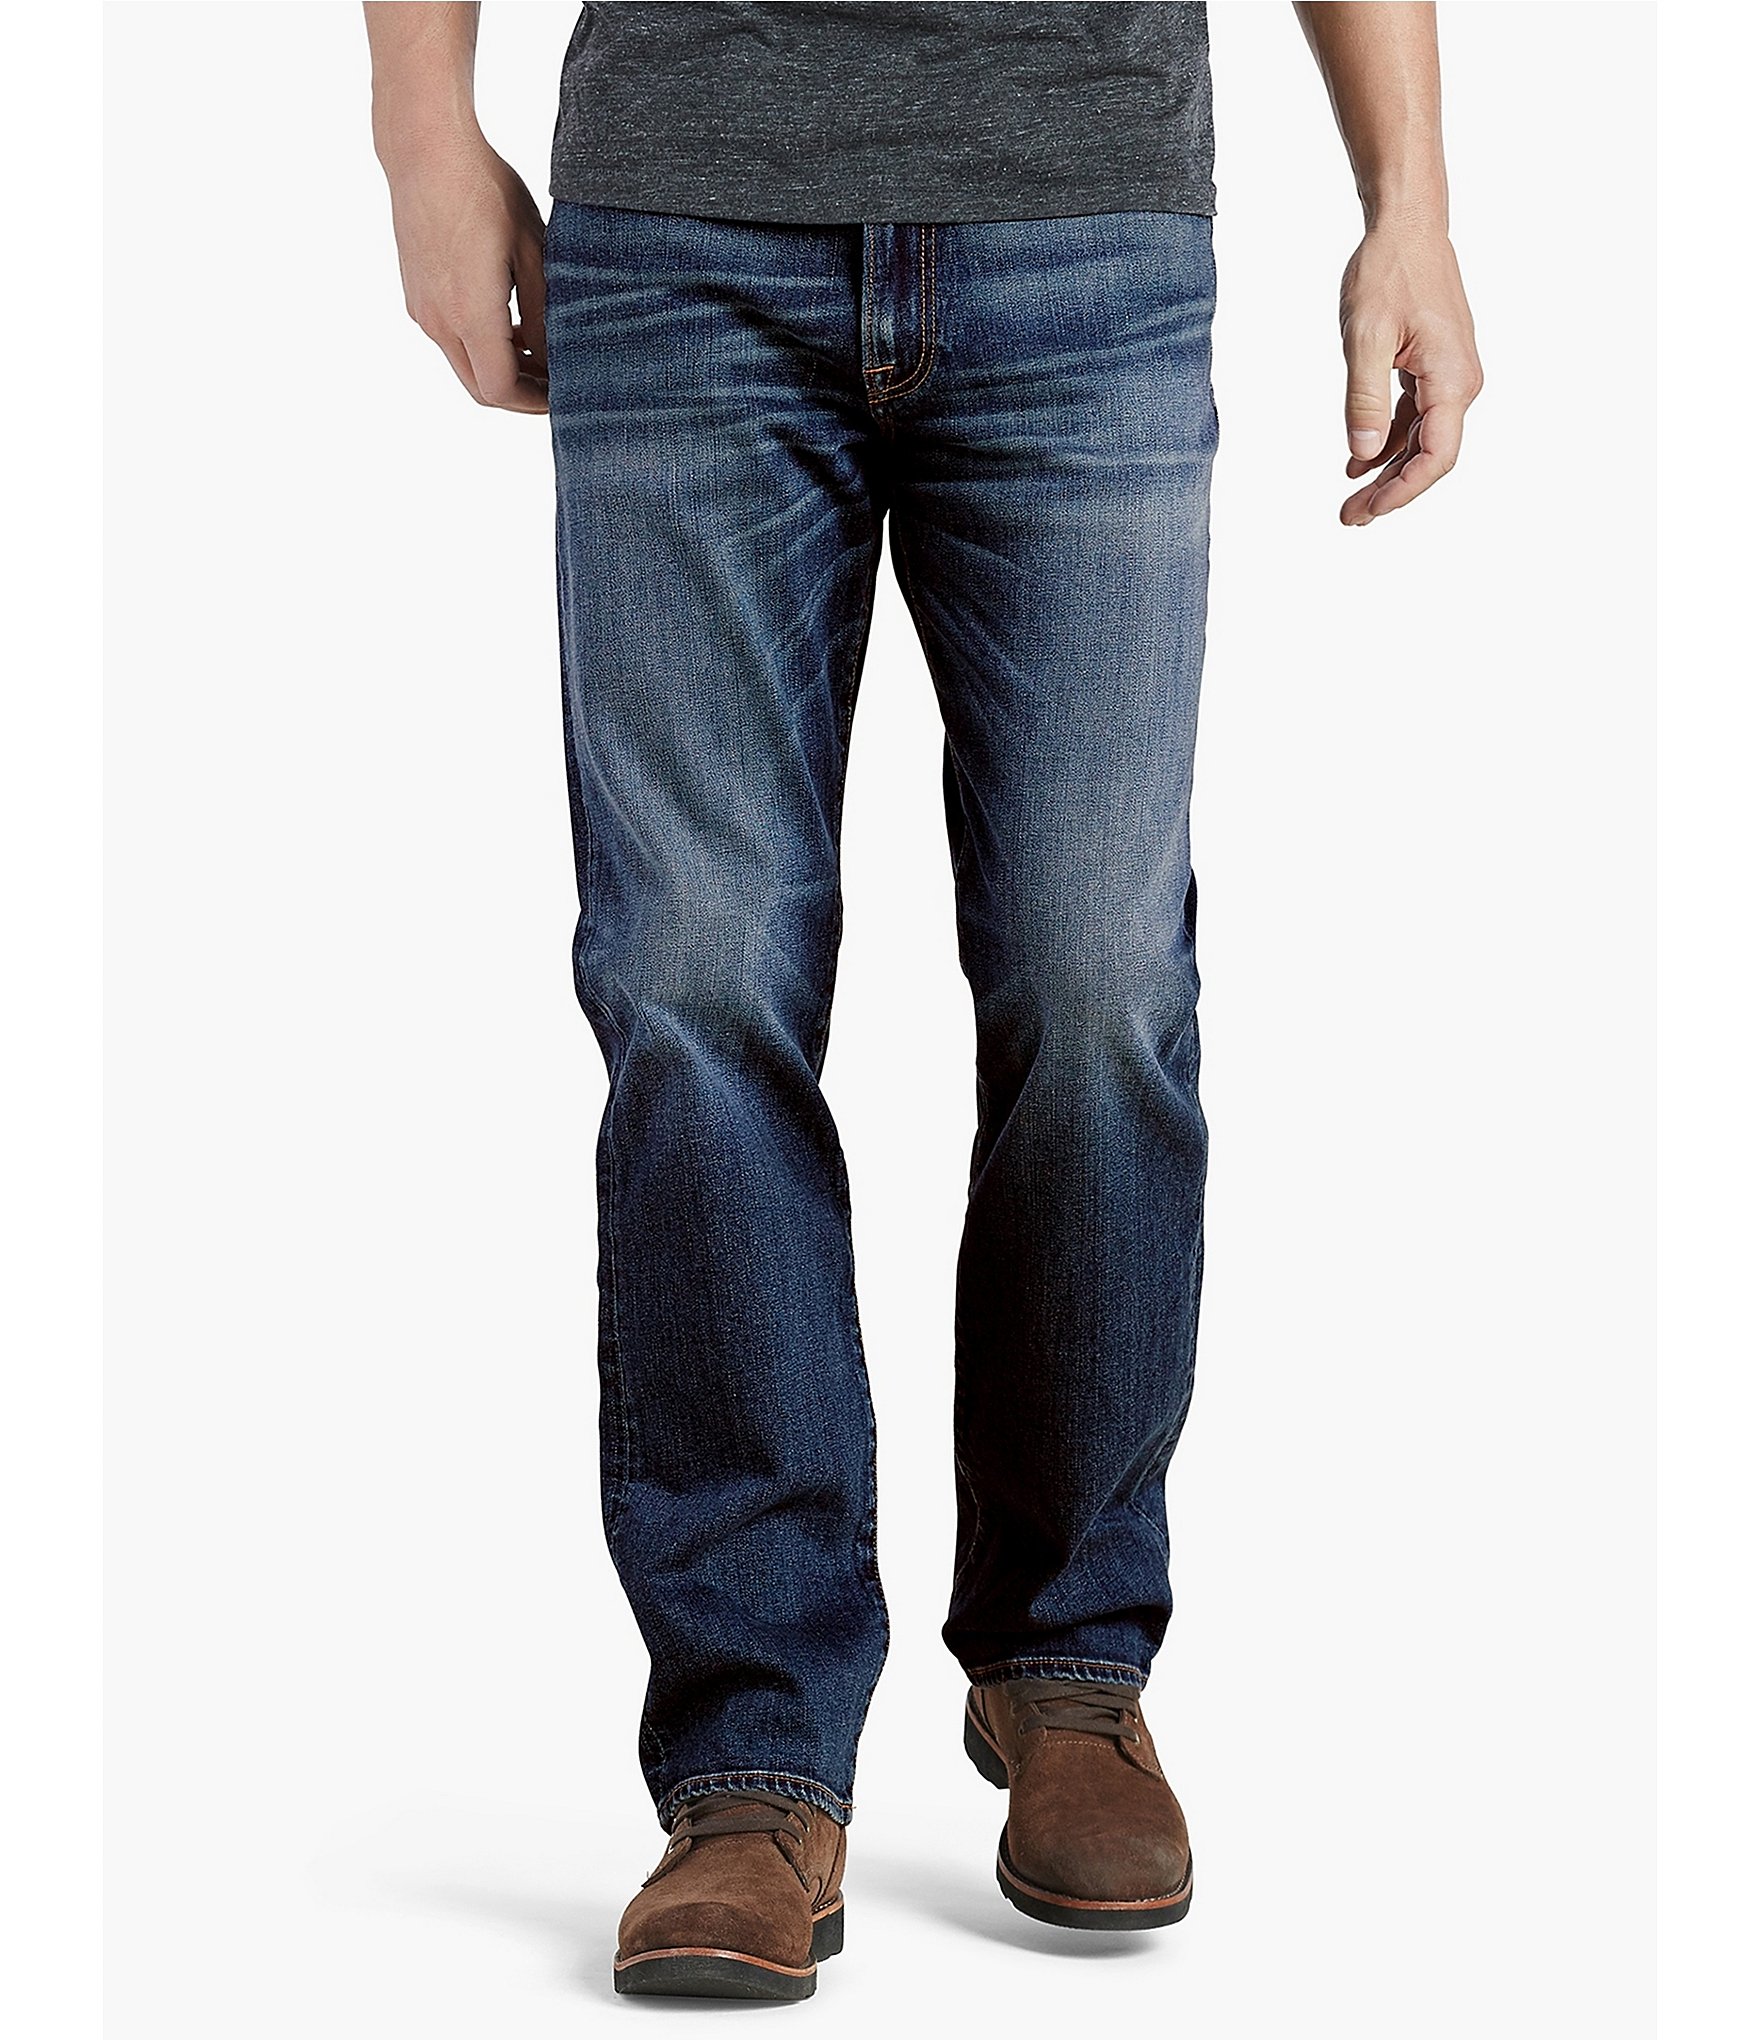 https://dimg.dillards.com/is/image/DillardsZoom/zoom/lucky-brand-181-relaxed-straight-jeans/00000001_zi_lakewood04549077.jpg